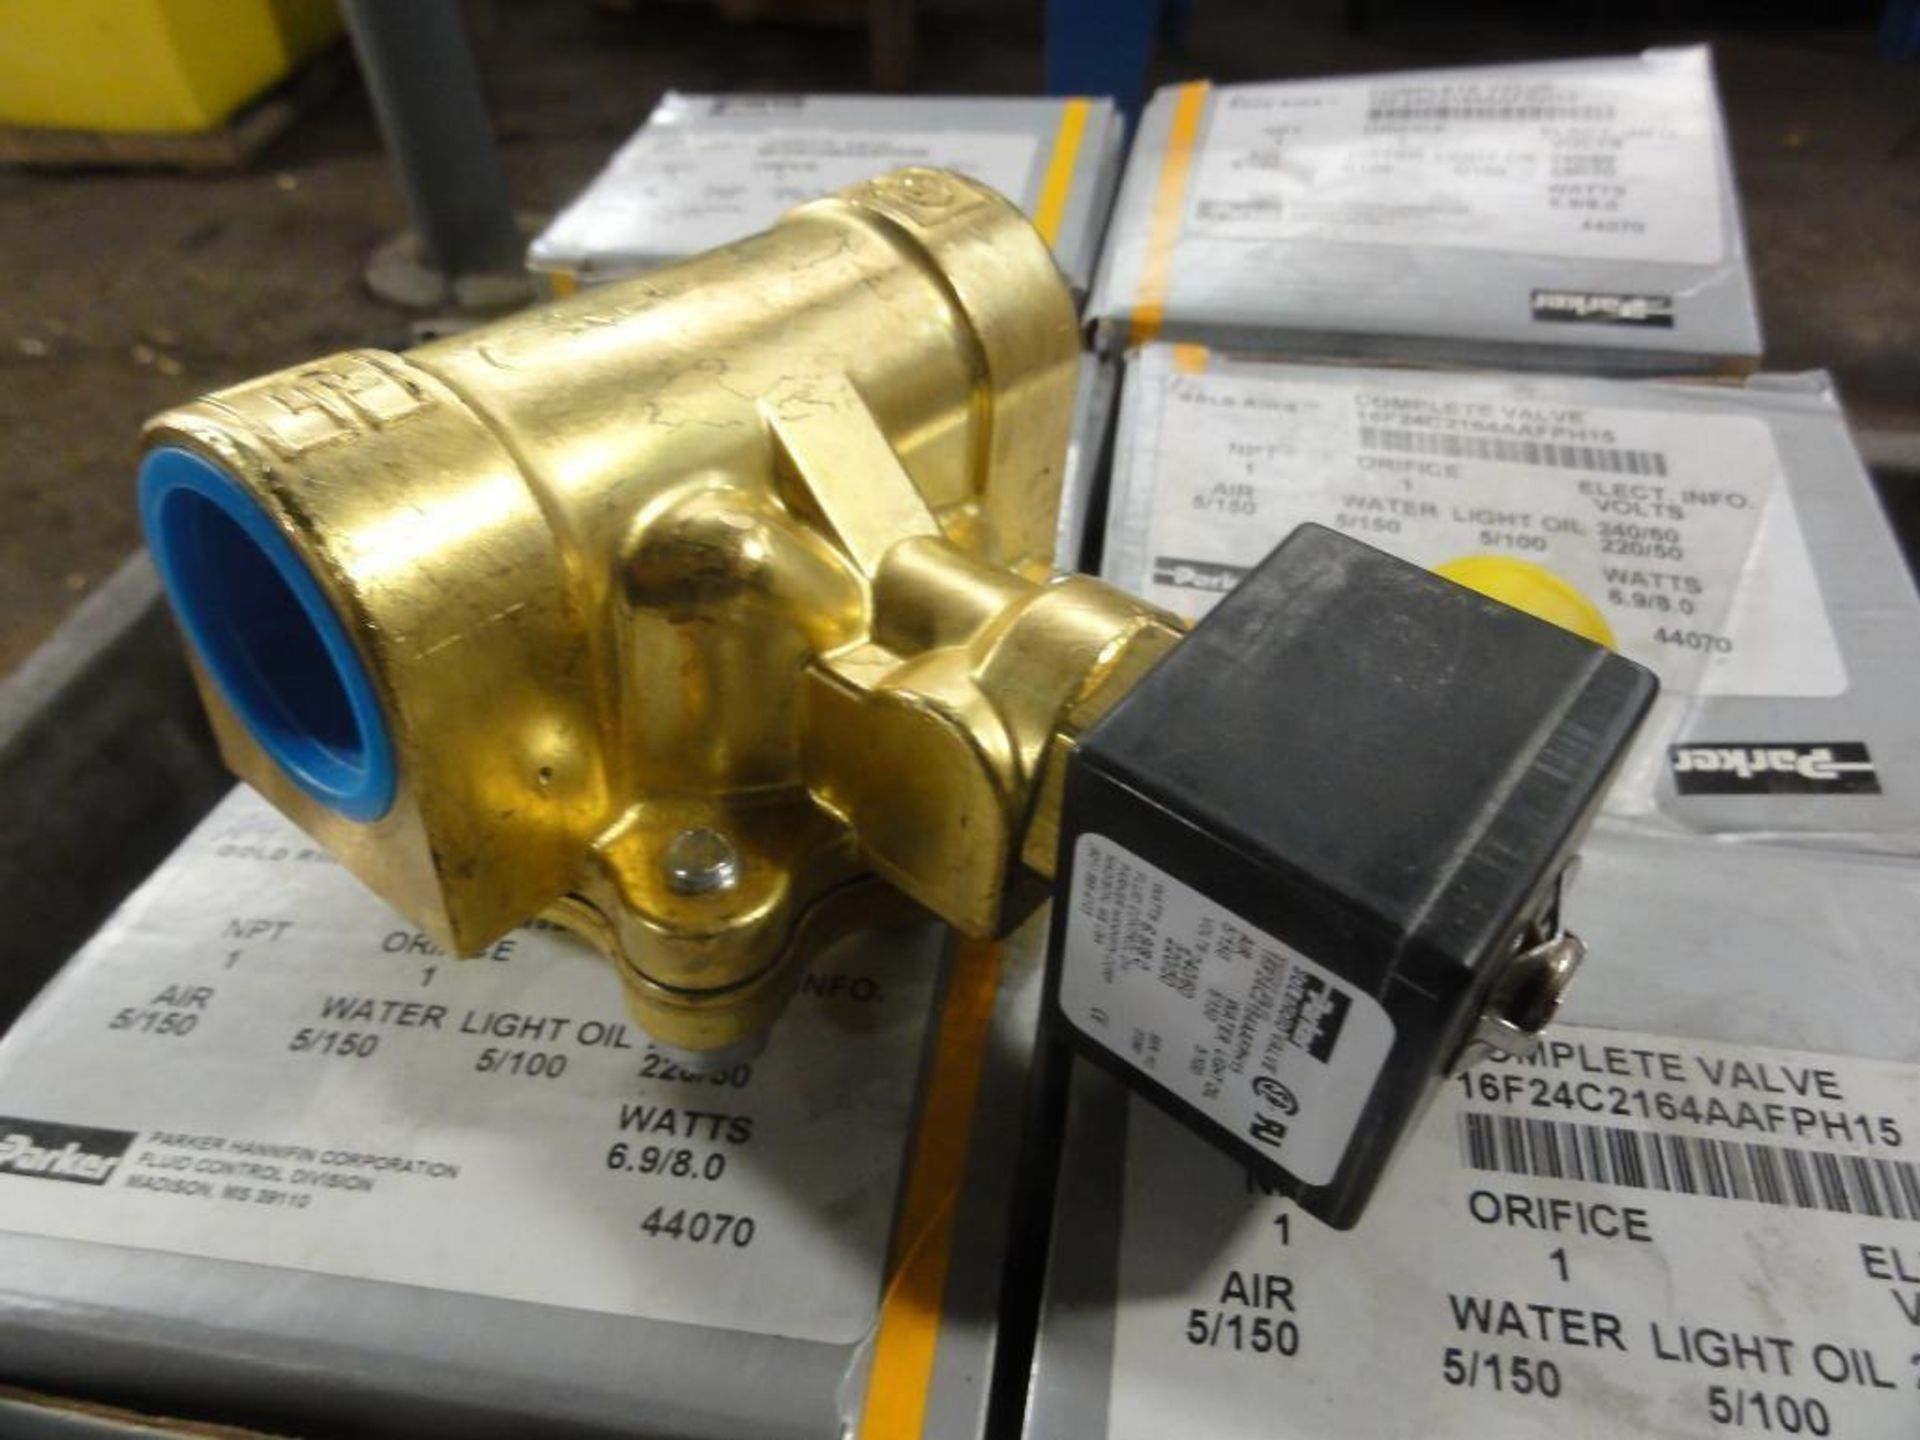 (8) NEW, Parker Complete Valves, Model 16F24C2164AAFPH15, NPT: 1, Oriface: 1, Air: 5/150, Water: 5/ - Image 4 of 6